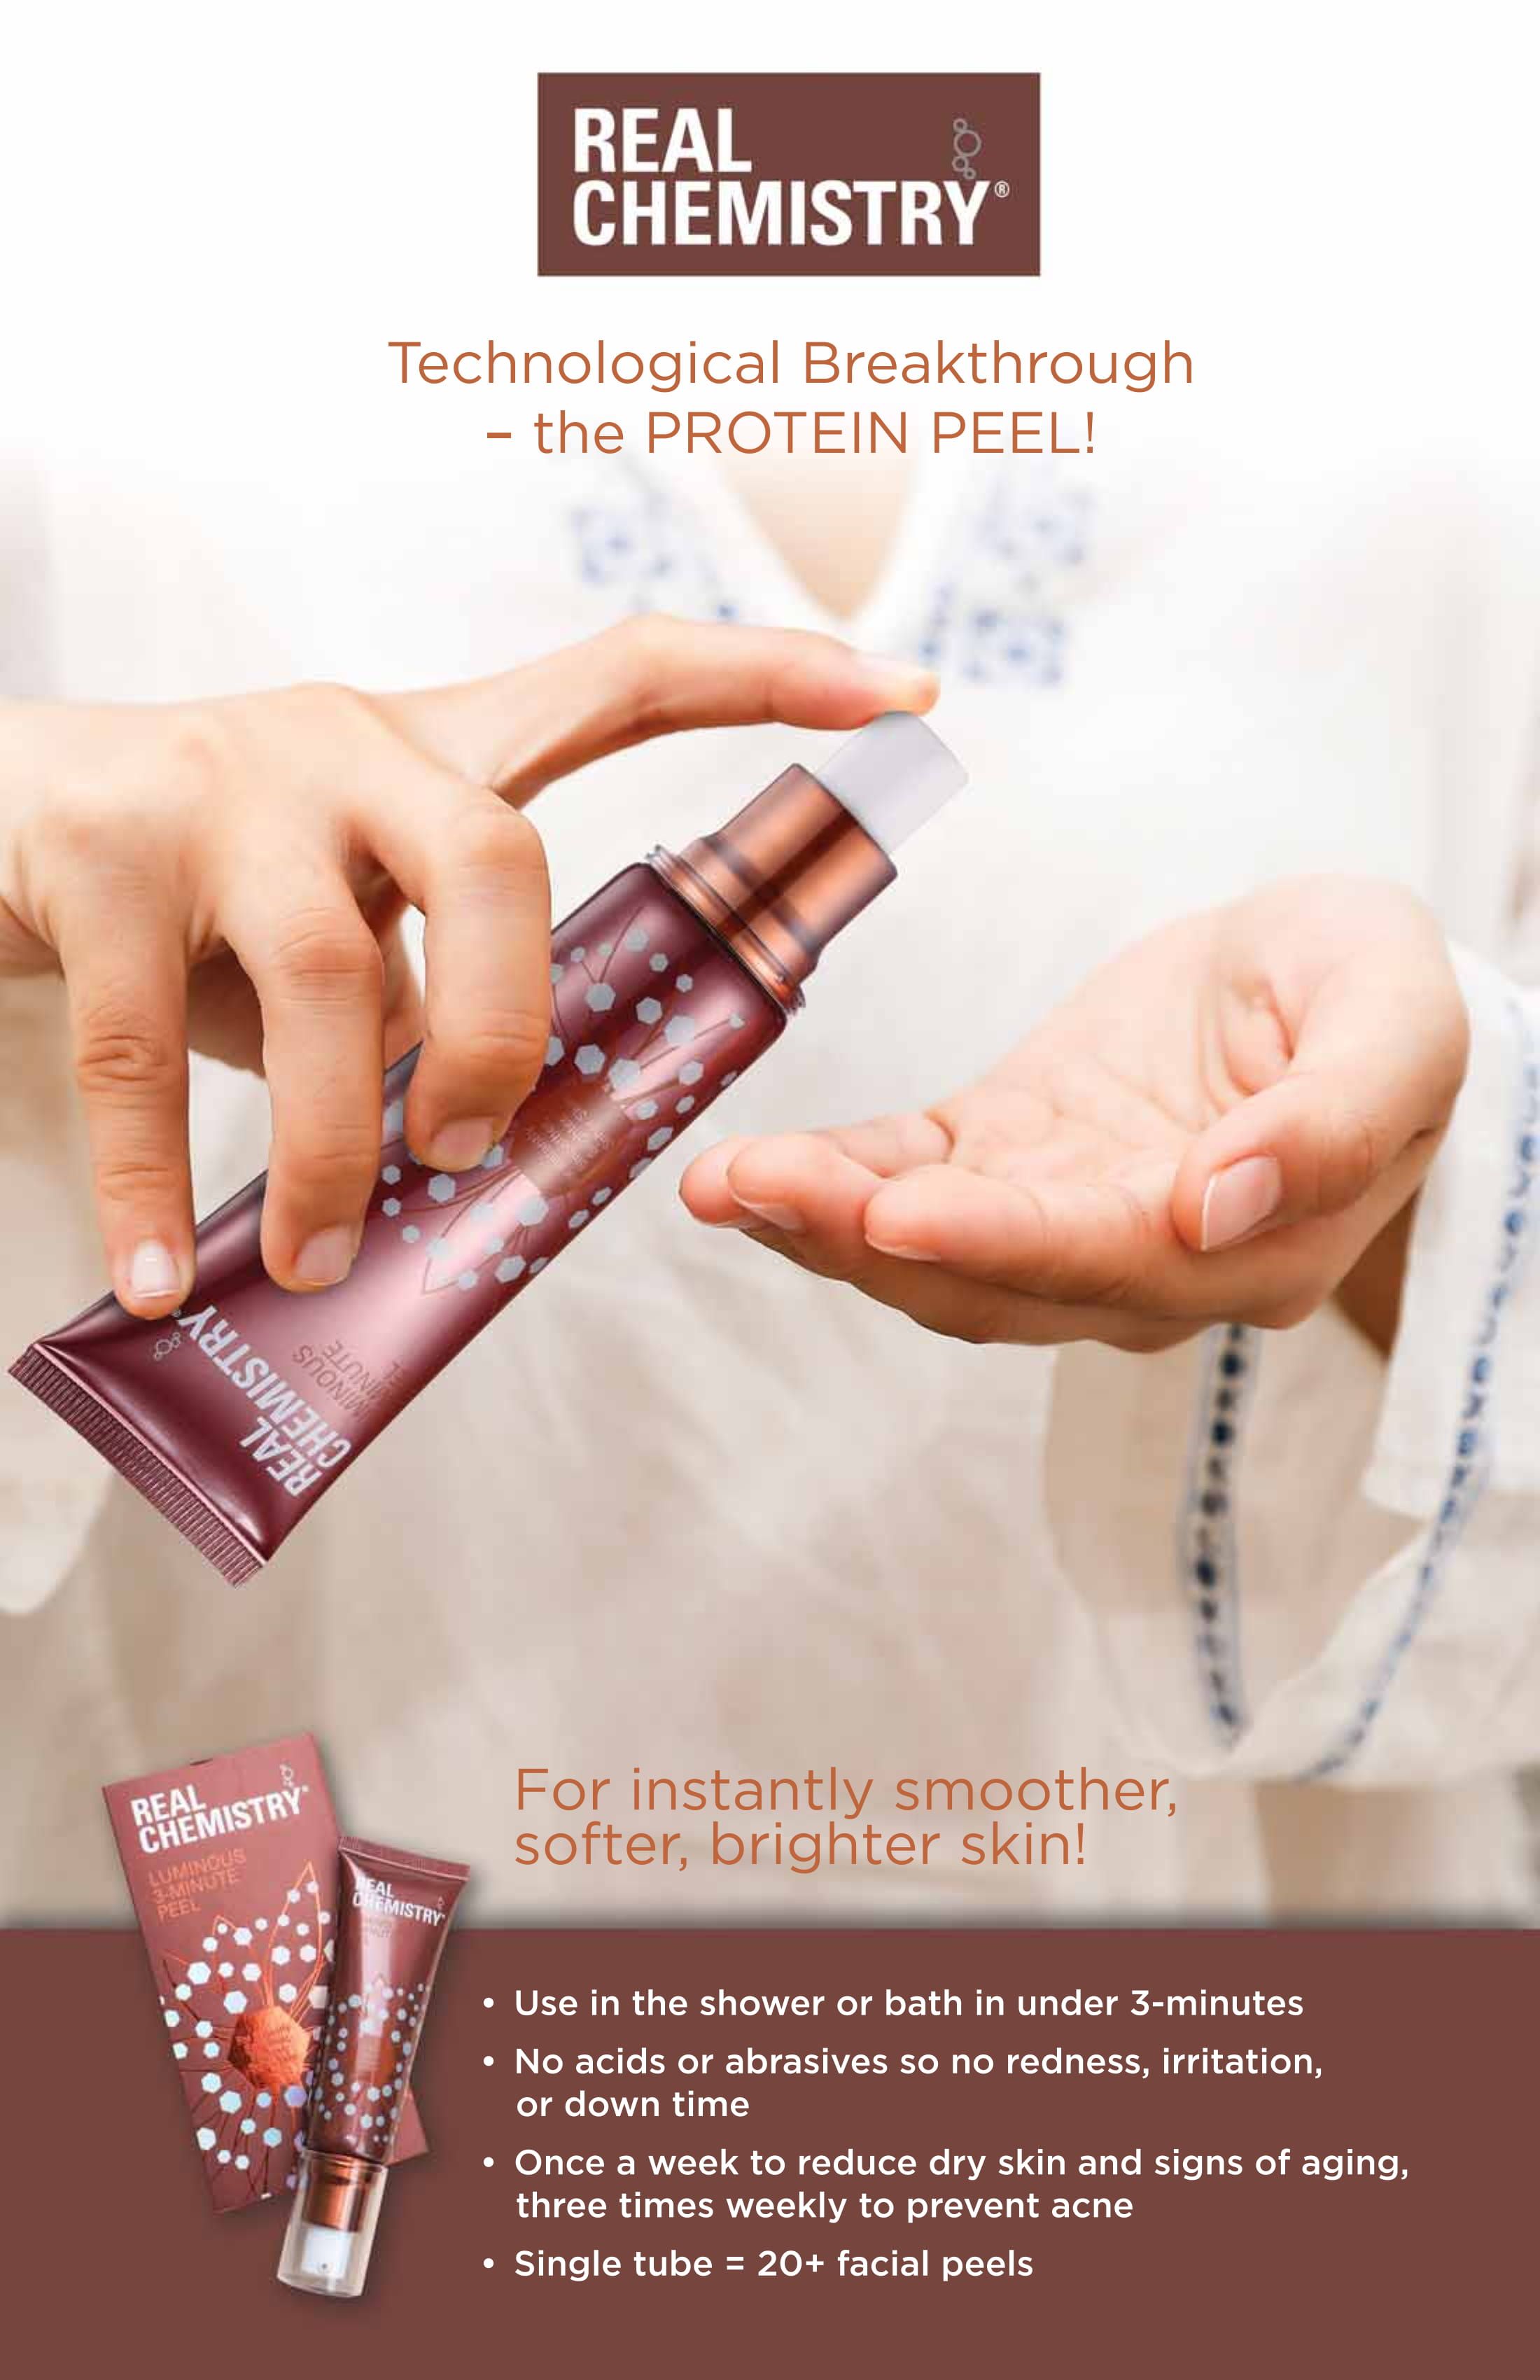 Real Chemistry? Technological Breakthrough- the PROTEIN PEEL! For instantly smoother, softer, brighter skin! Use in the shower or bath in under 3-minutes. No acids or abrasives so no redness, irritation, or down time. Once a week to reduce dry skin and signs of aging, three times a week to prevent acne, Single tube=20+ facial peels